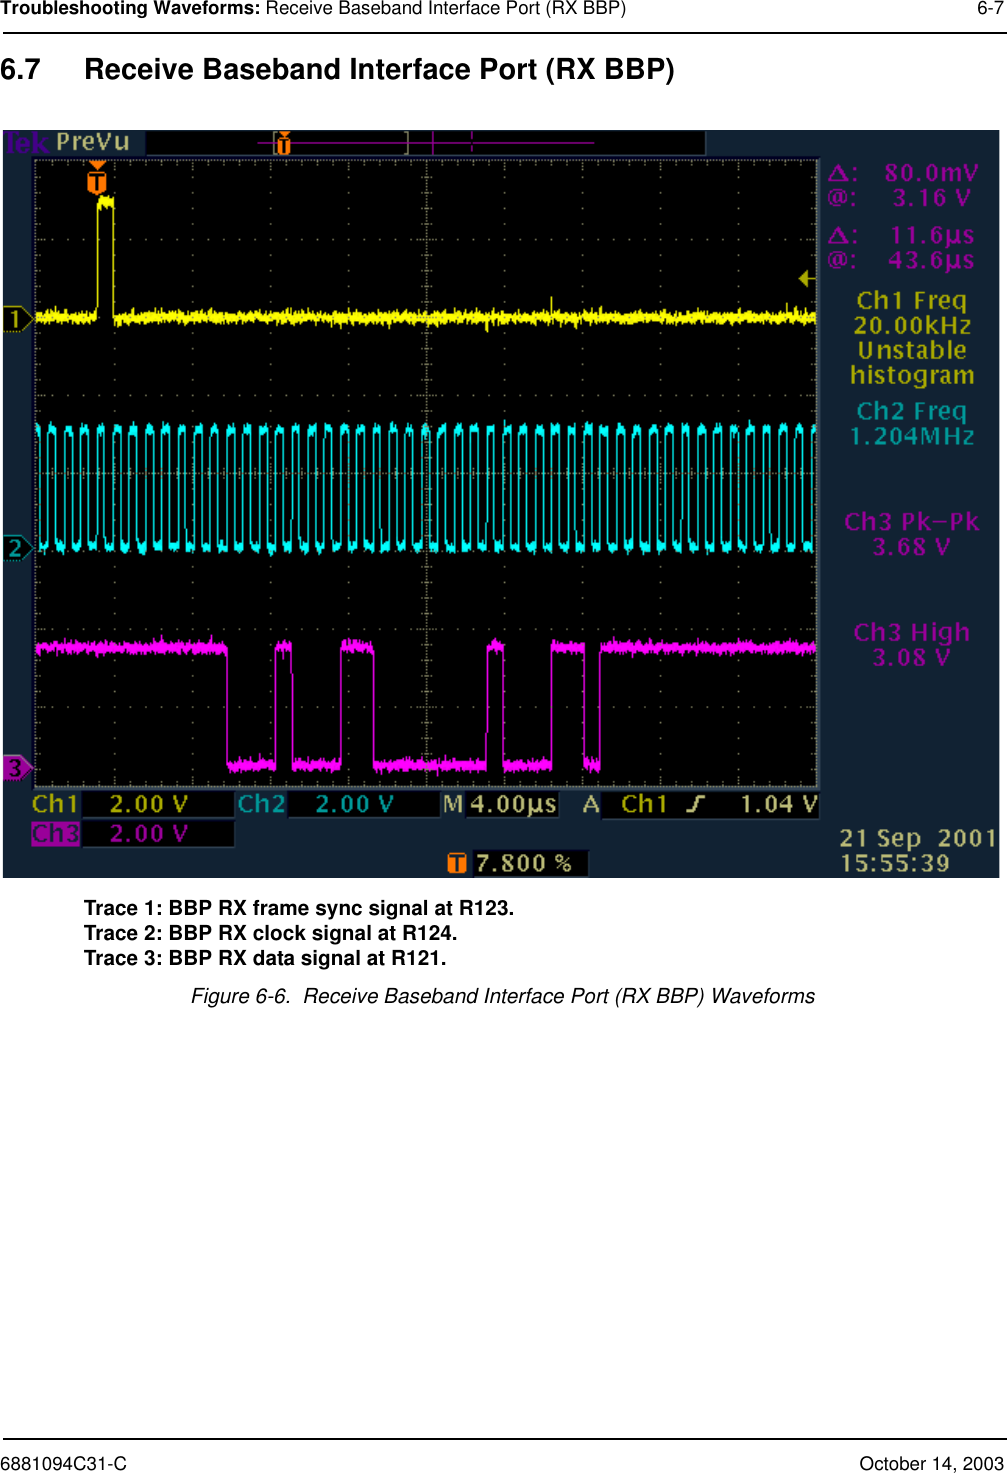 6881094C31-C October 14, 2003Troubleshooting Waveforms: Receive Baseband Interface Port (RX BBP) 6-76.7 Receive Baseband Interface Port (RX BBP)Trace 1: BBP RX frame sync signal at R123.Trace 2: BBP RX clock signal at R124.Trace 3: BBP RX data signal at R121.Figure 6-6.  Receive Baseband Interface Port (RX BBP) Waveforms